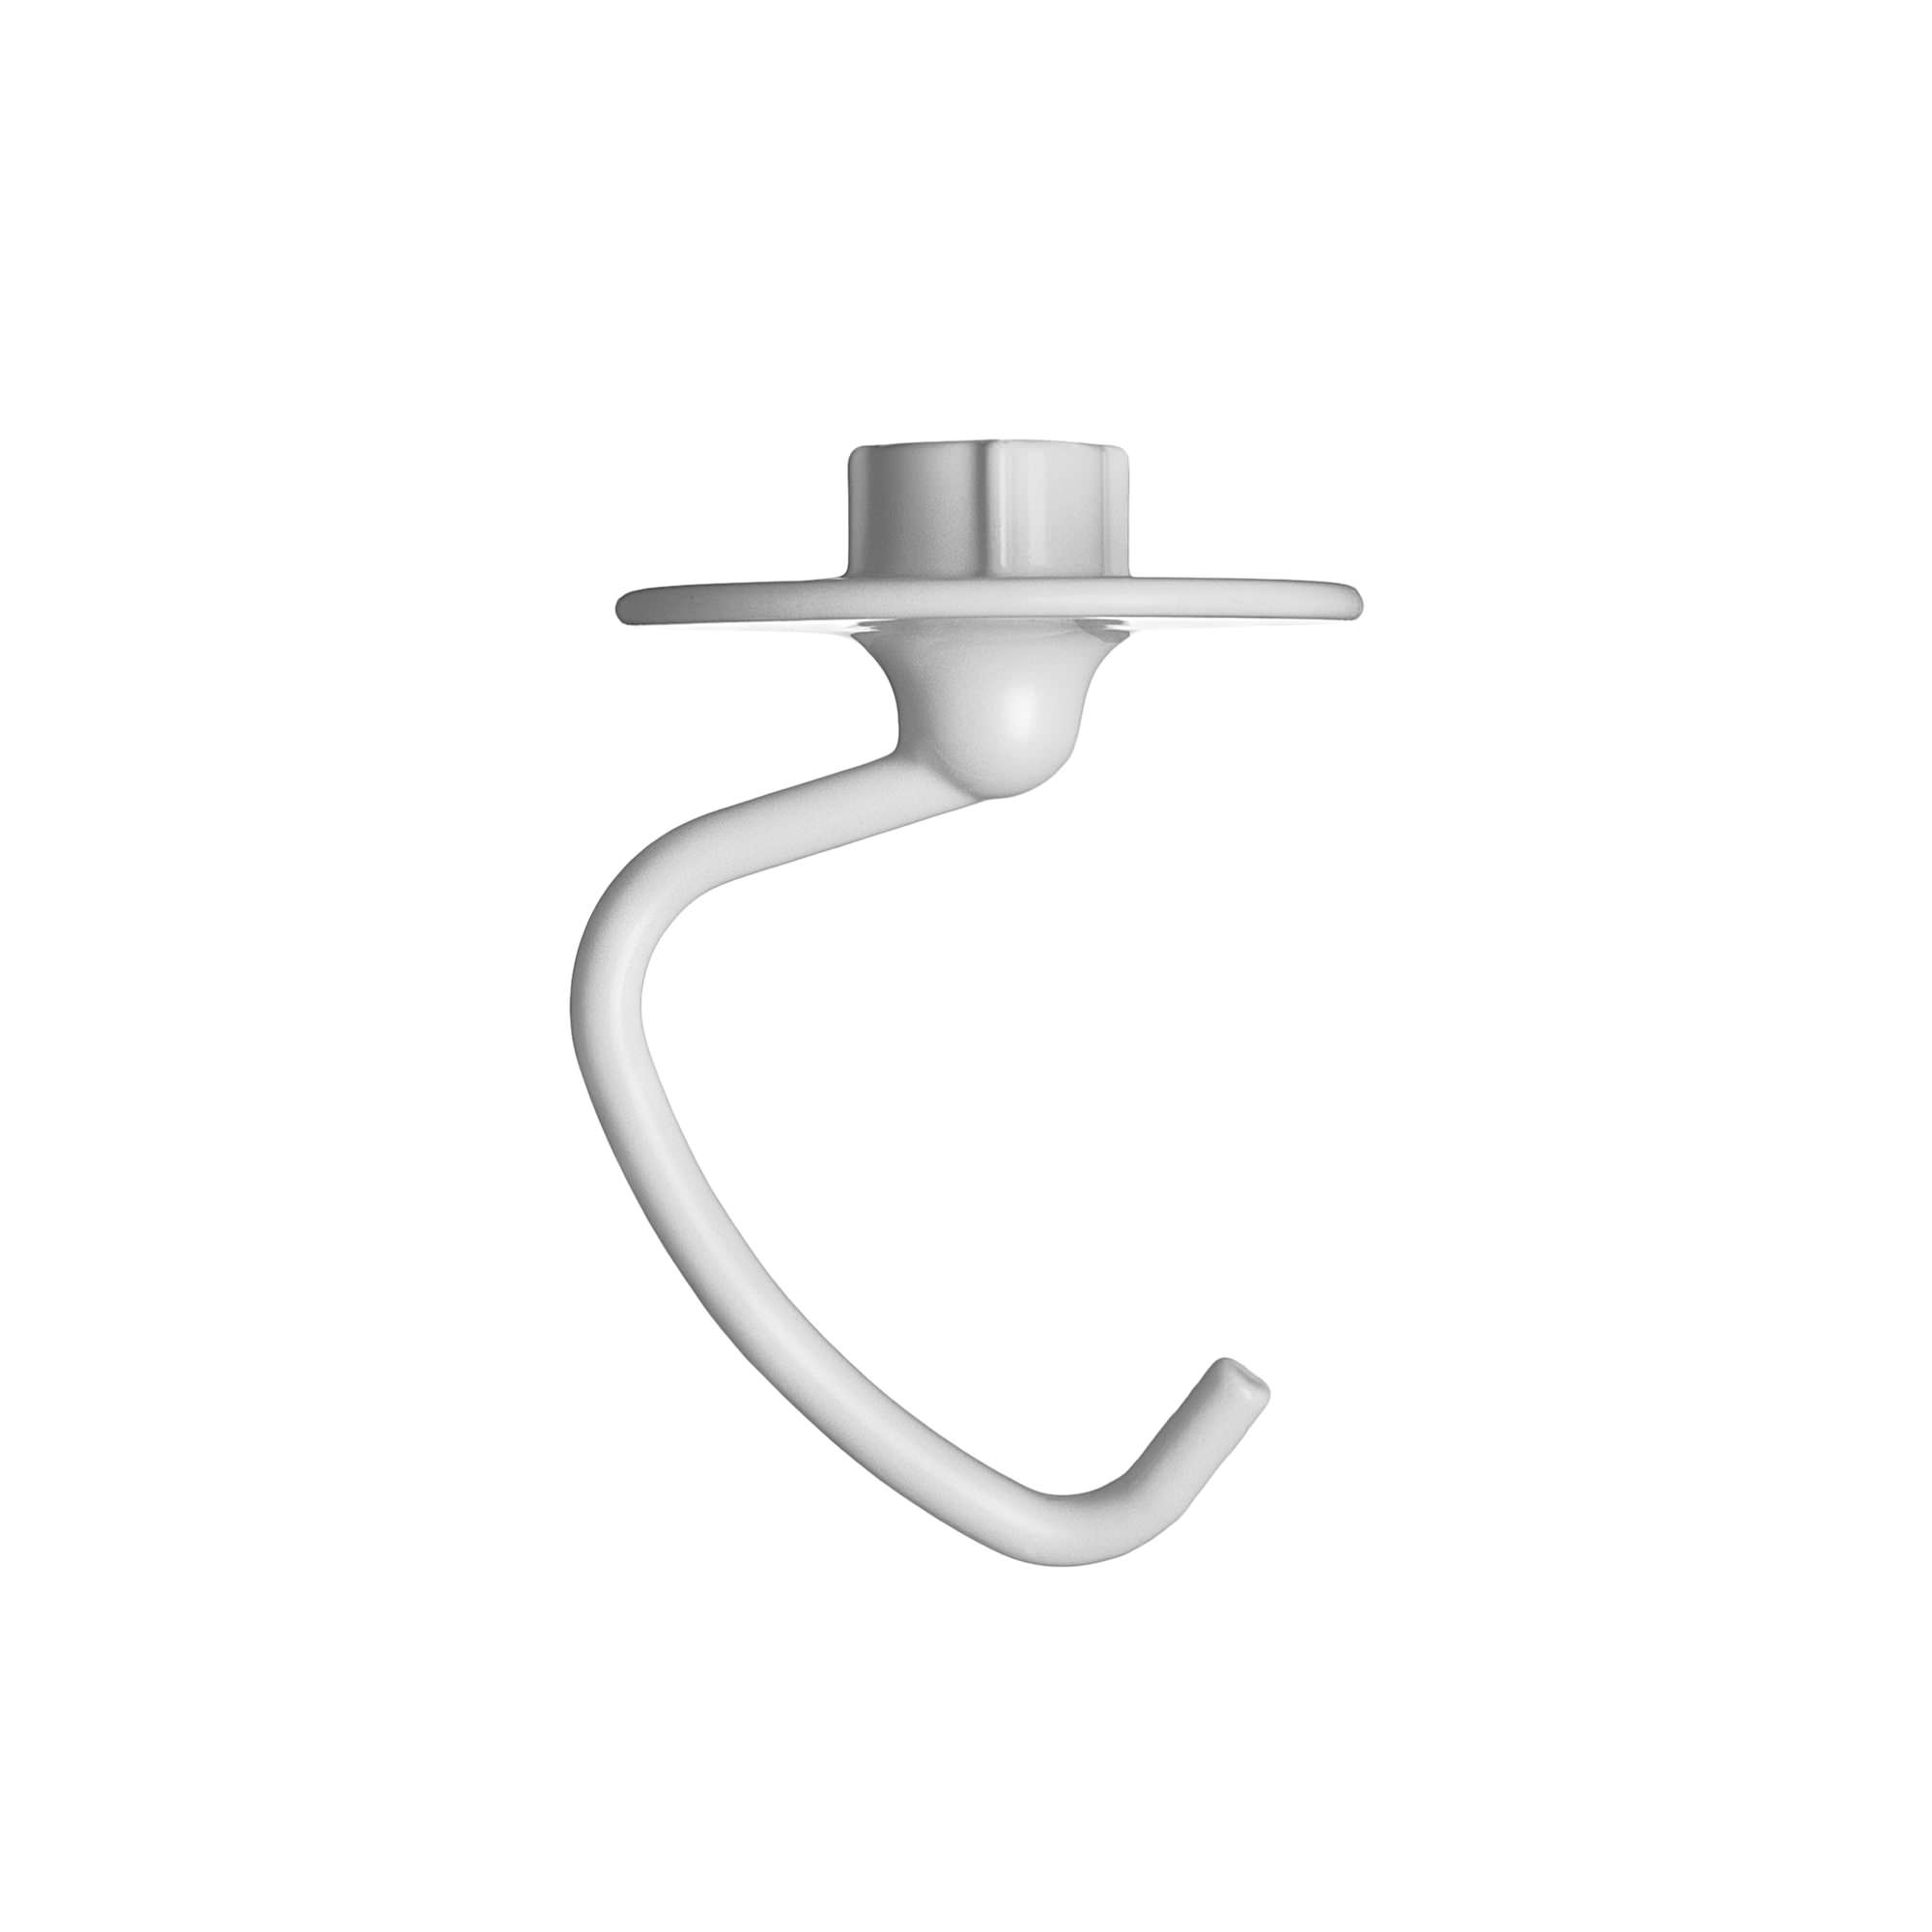 KitchenAid Coated Dough Hook for Bowl-Lift Stand Mixer Image 1